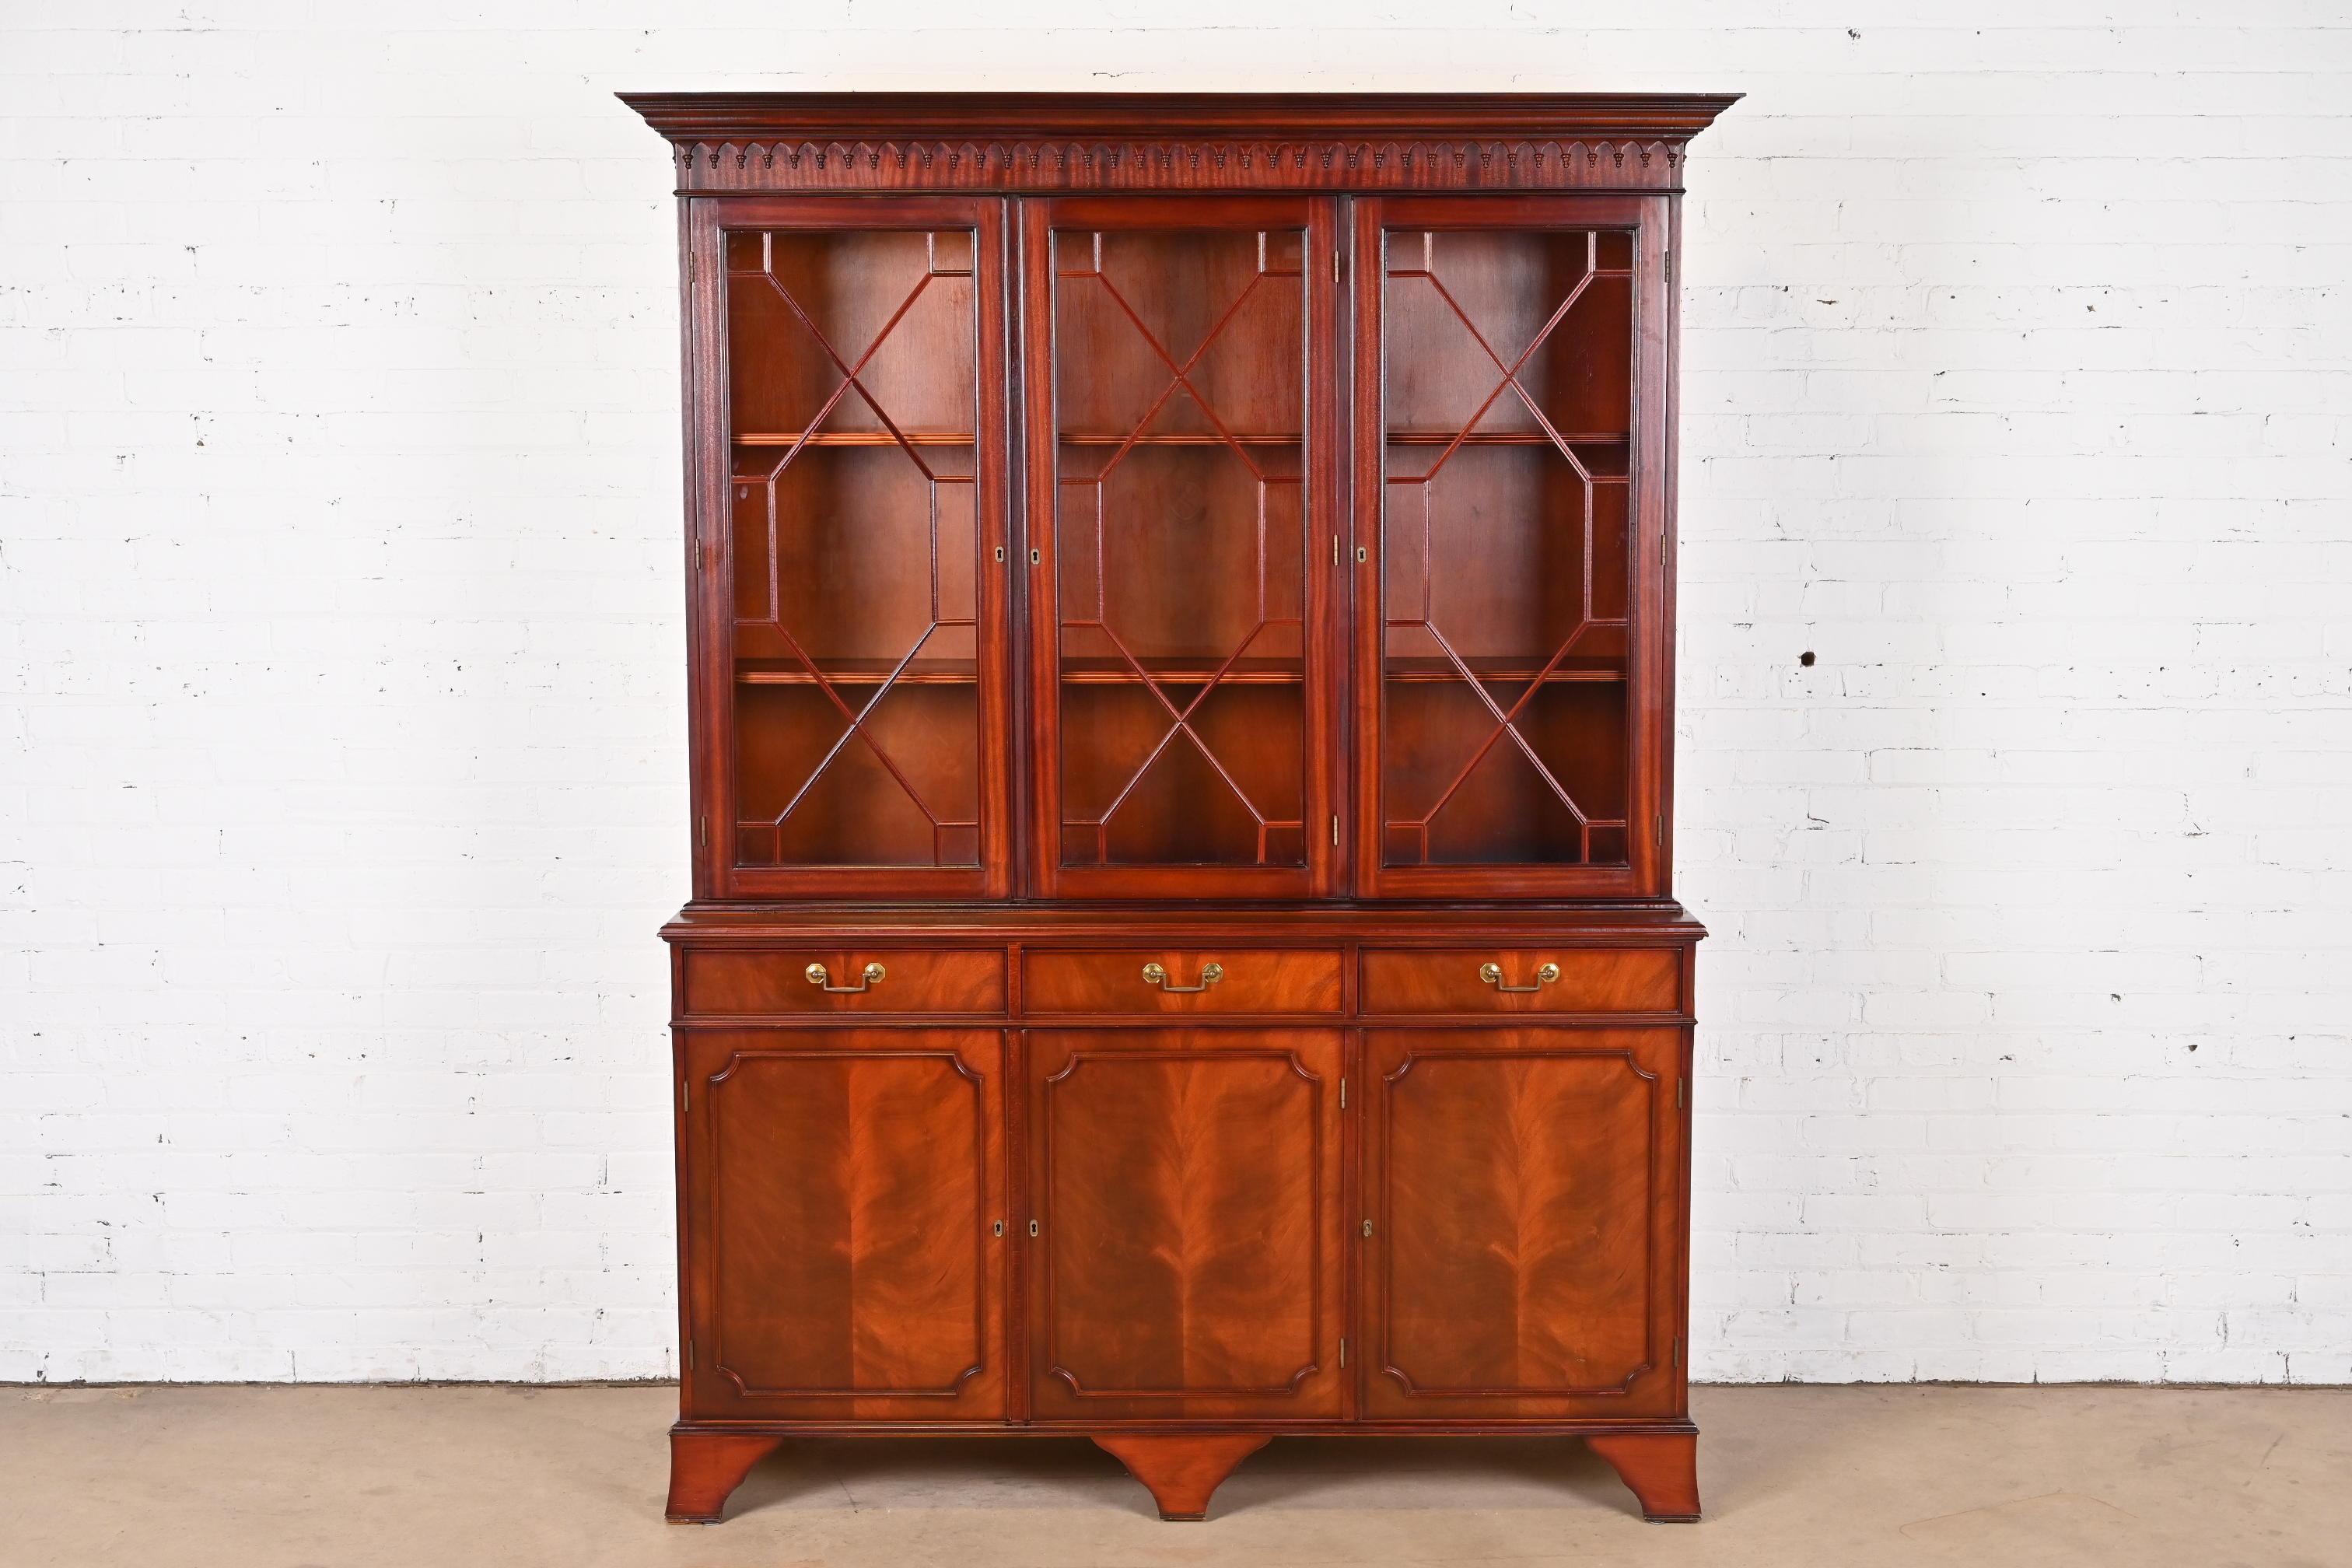 American Baker Furniture Style Georgian Carved Flame Mahogany Breakfront Bookcase Cabinet